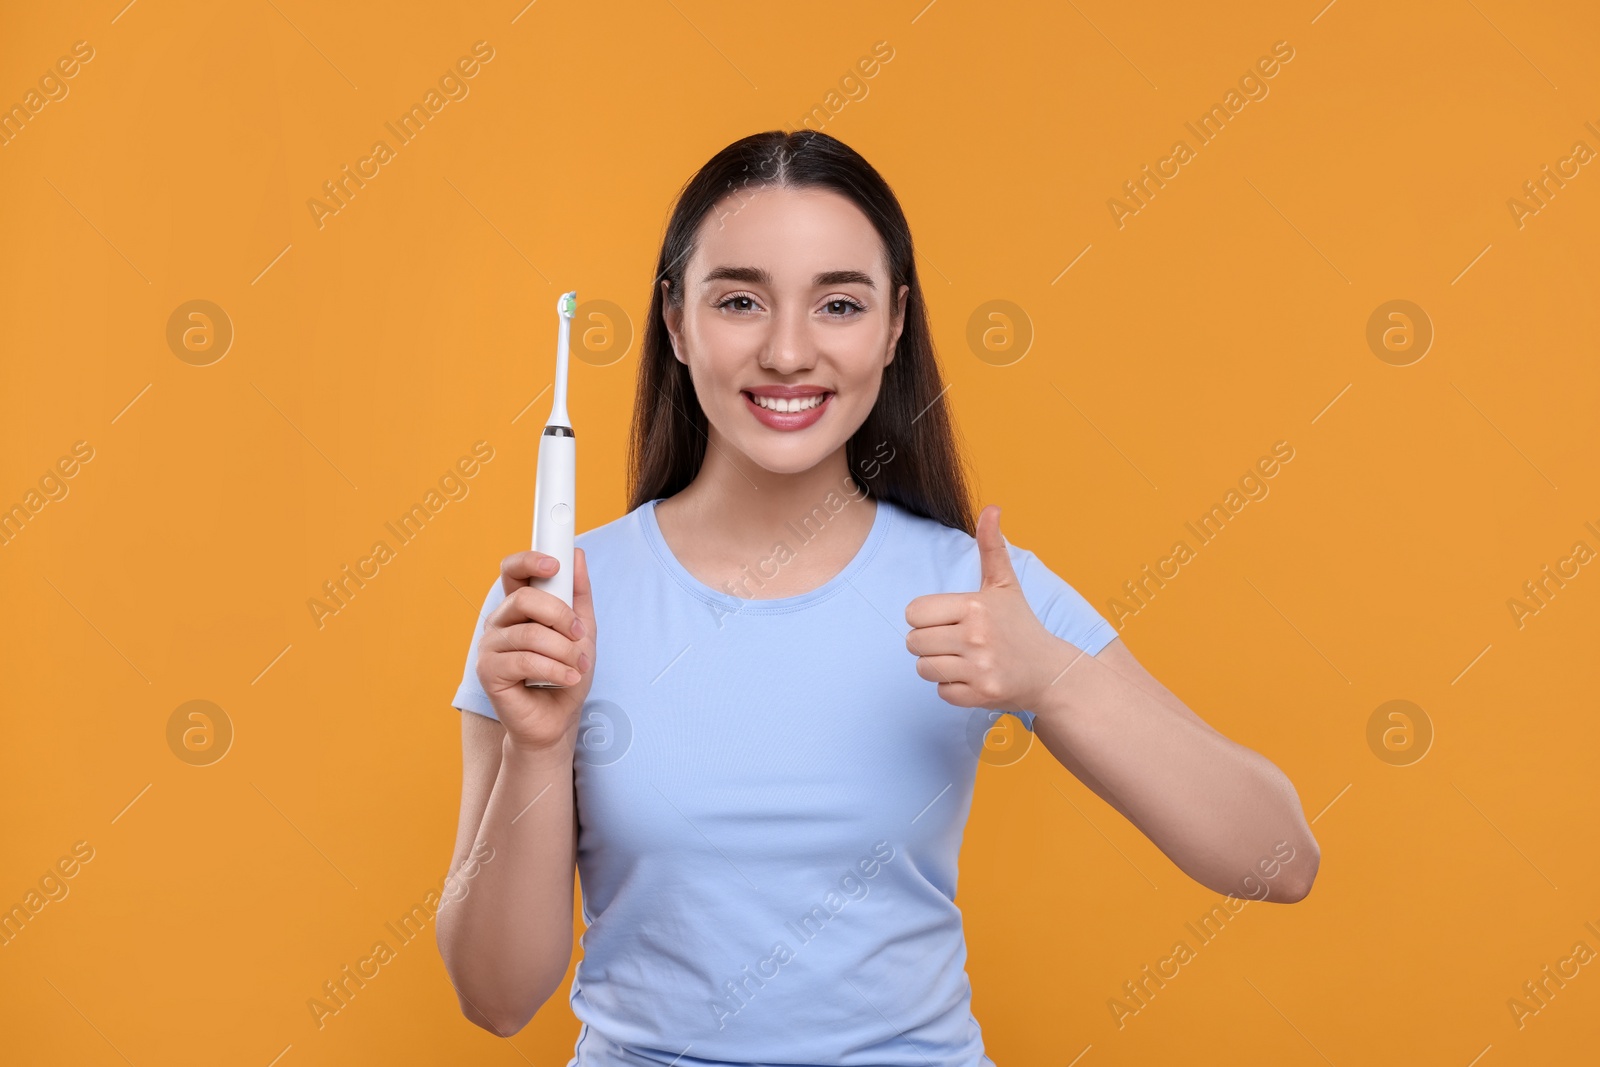 Photo of Happy young woman holding electric toothbrush and showing thumb up on yellow background